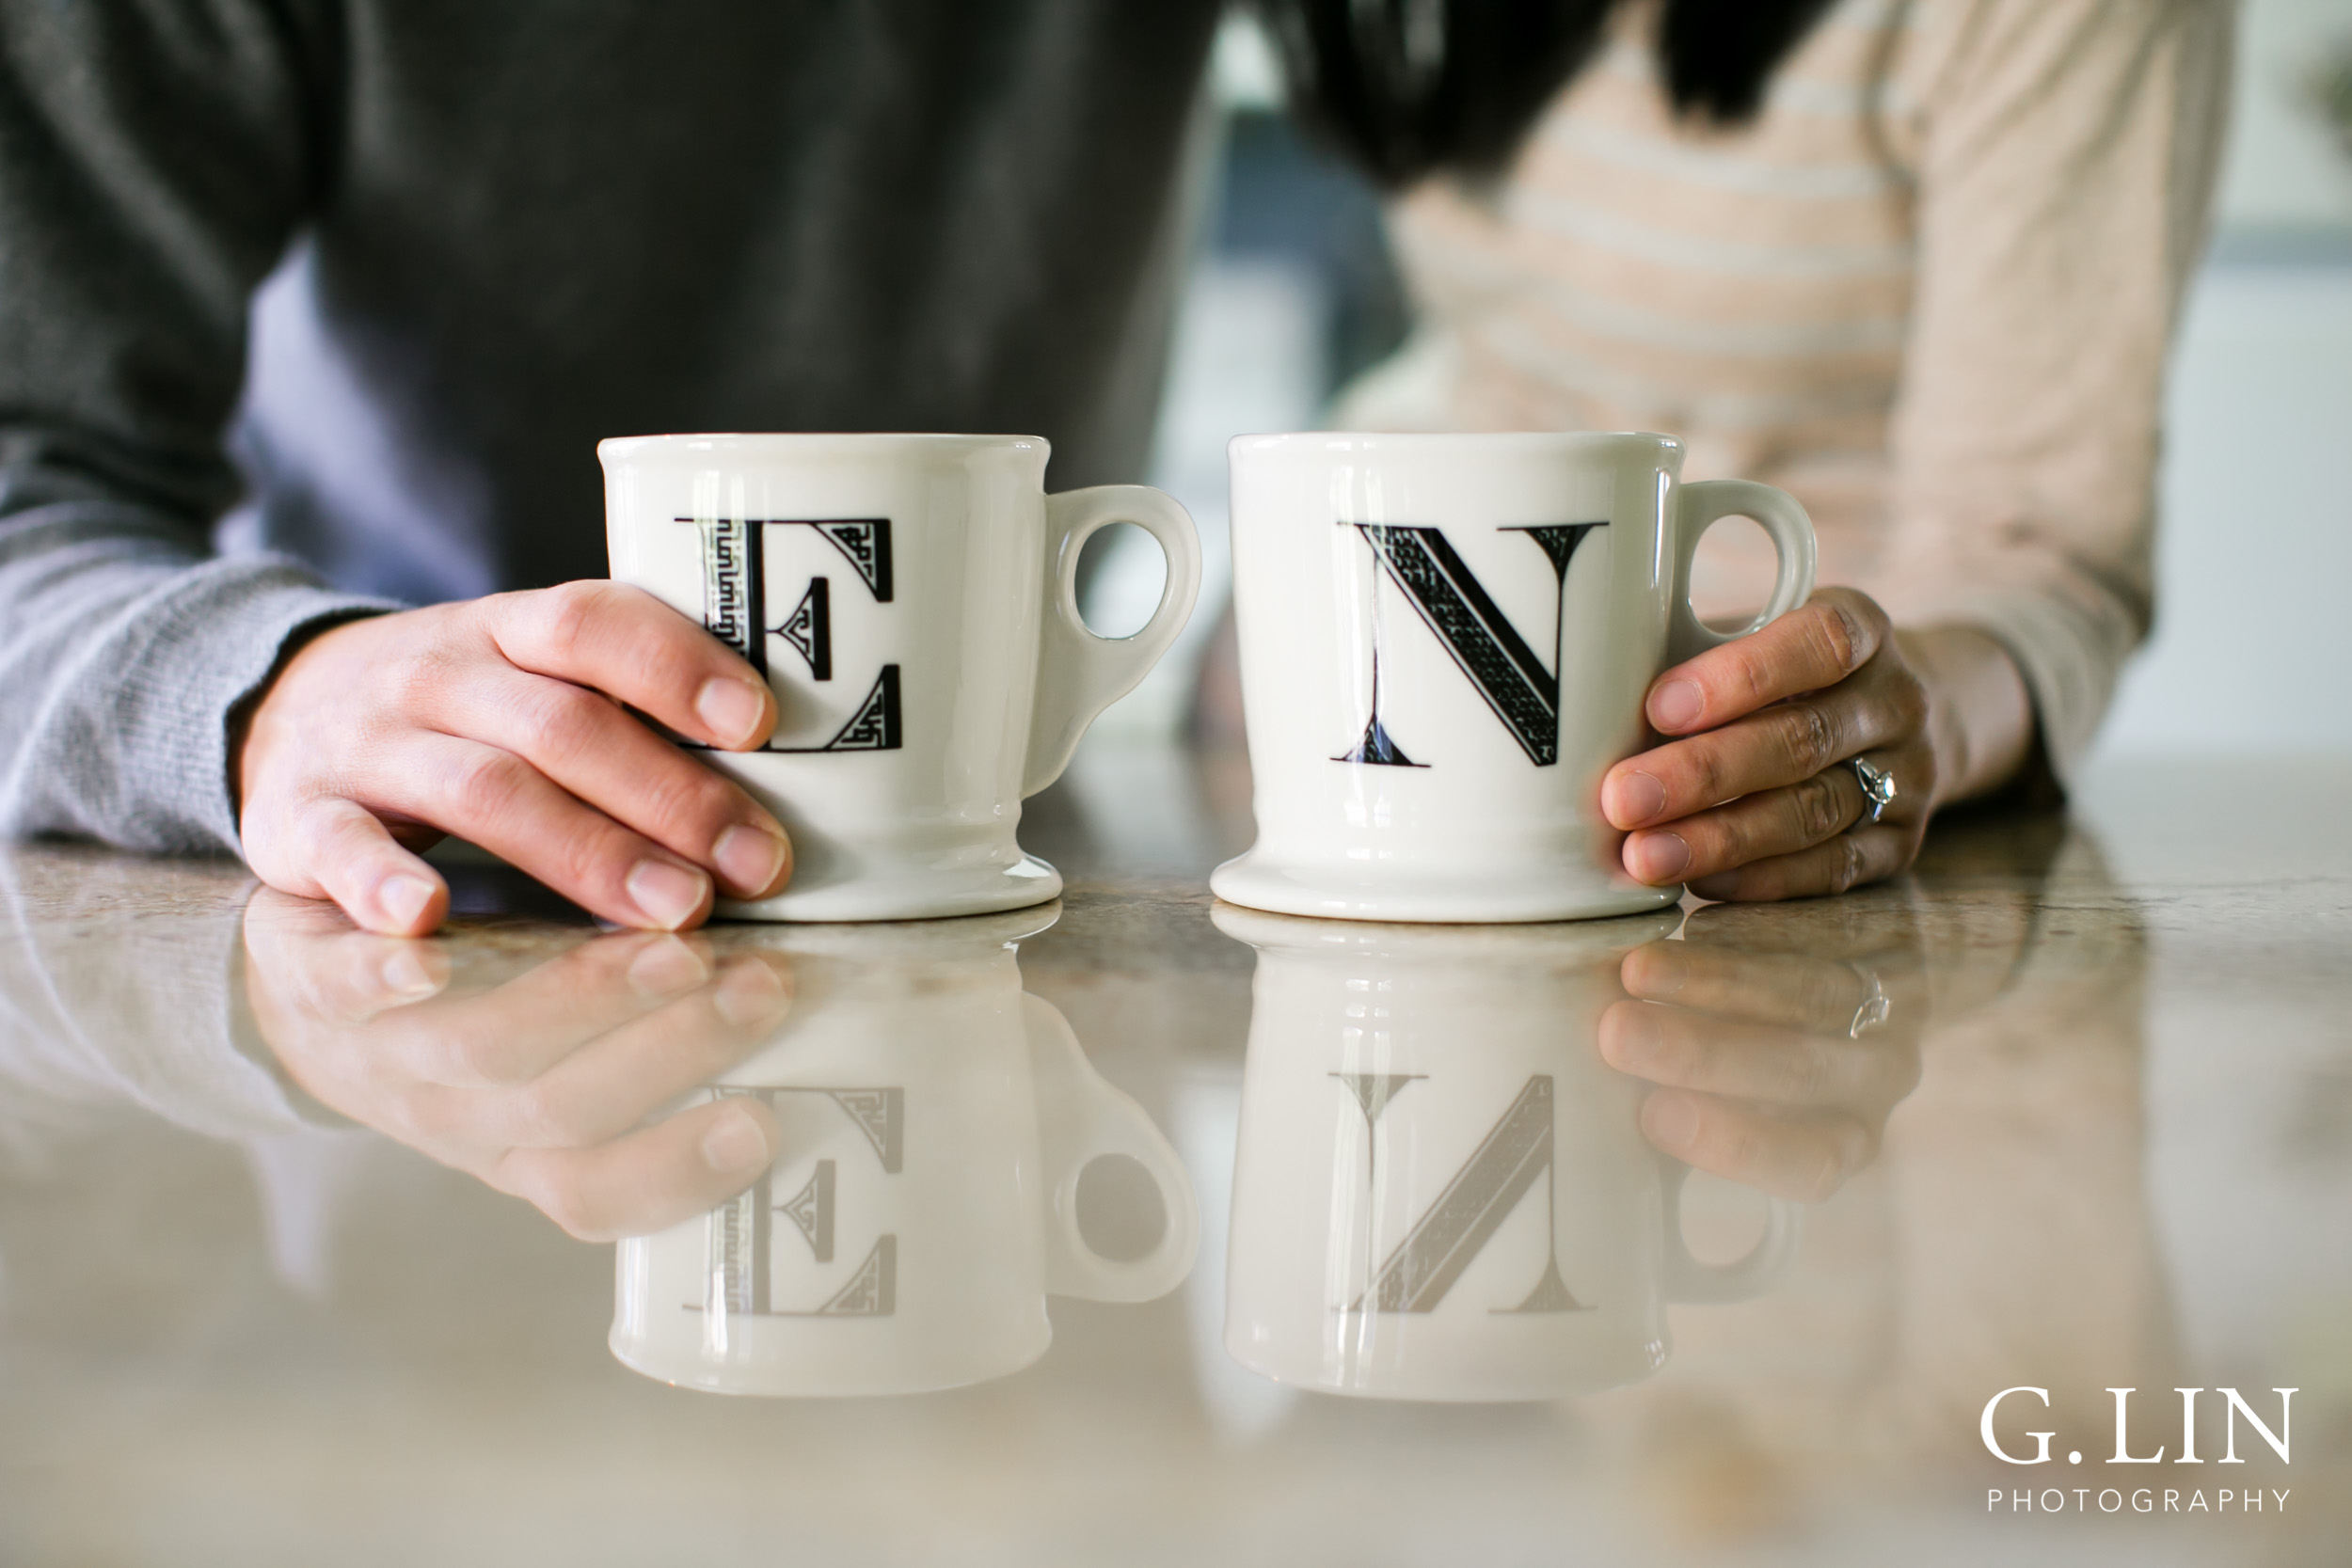 Durham Maternity Photography | G. Lin Photography | Close up shot of couple holding mugs in kitchen